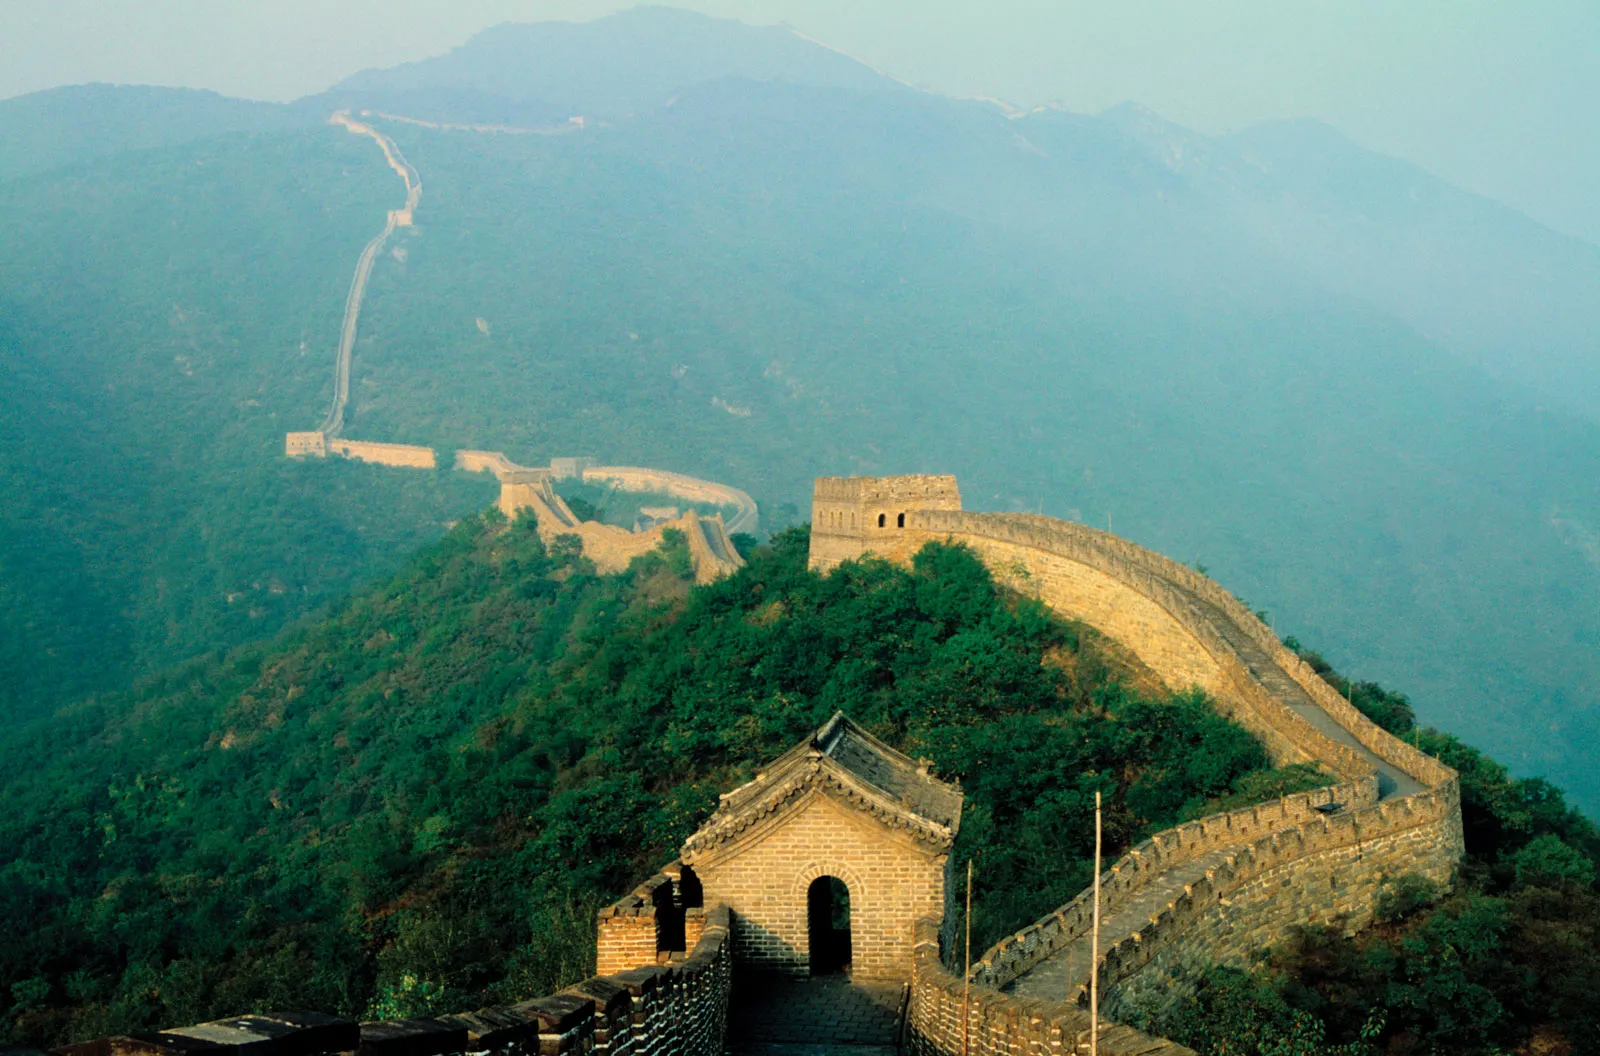 Aerial view of the Great Wall of China winding through mountainous terrain, showcasing its vast length and rugged landscape.